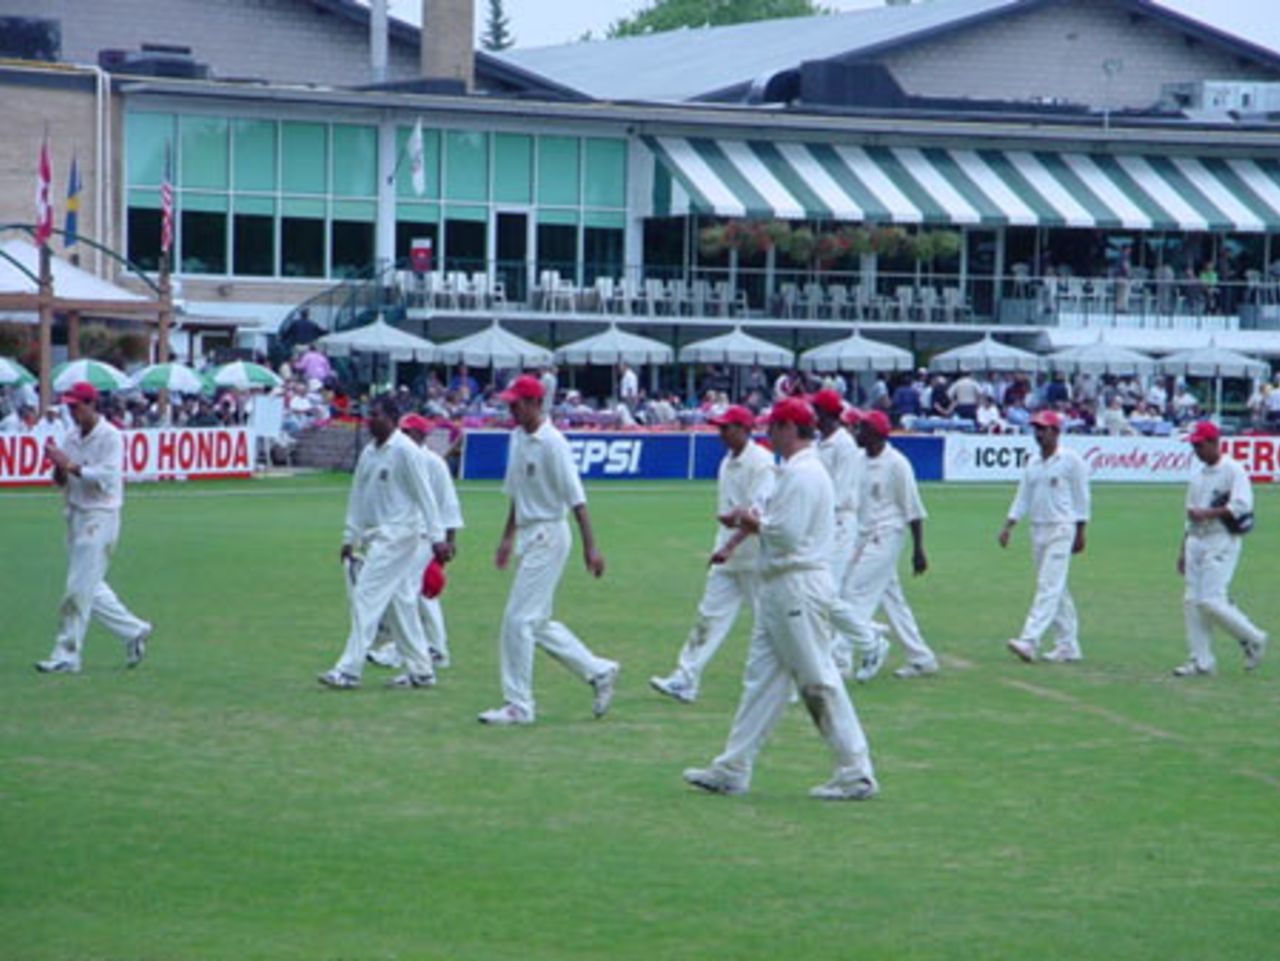 The Canadian team walk off the field after restricting Scotland to 176 for nine in their 50 overs batting first. ICC Trophy 2001: Canada v Scotland at Toronto, Cricket, Skating and Curling Club, 17 July 2001.